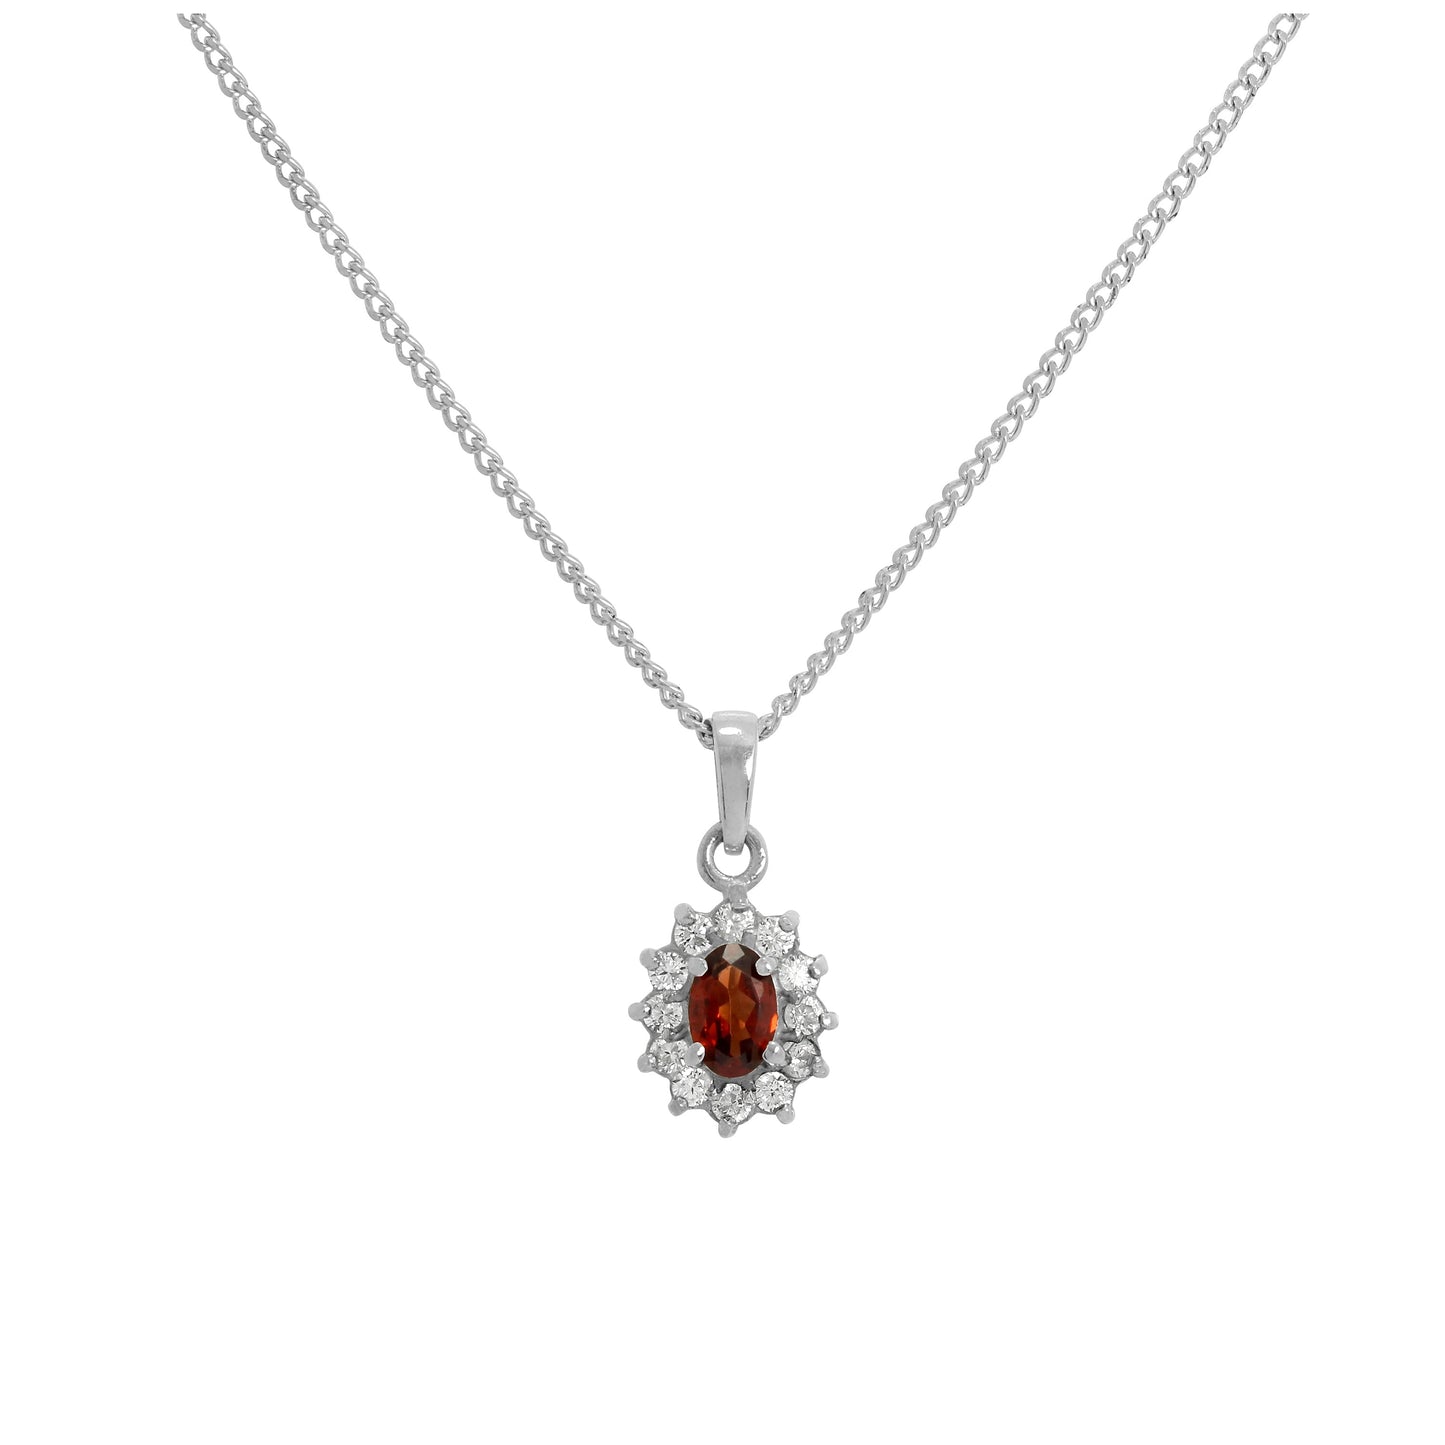 Sterling Silver Garnet & CZ Crystal Oval Pendant Necklace 16 - 24 Inches